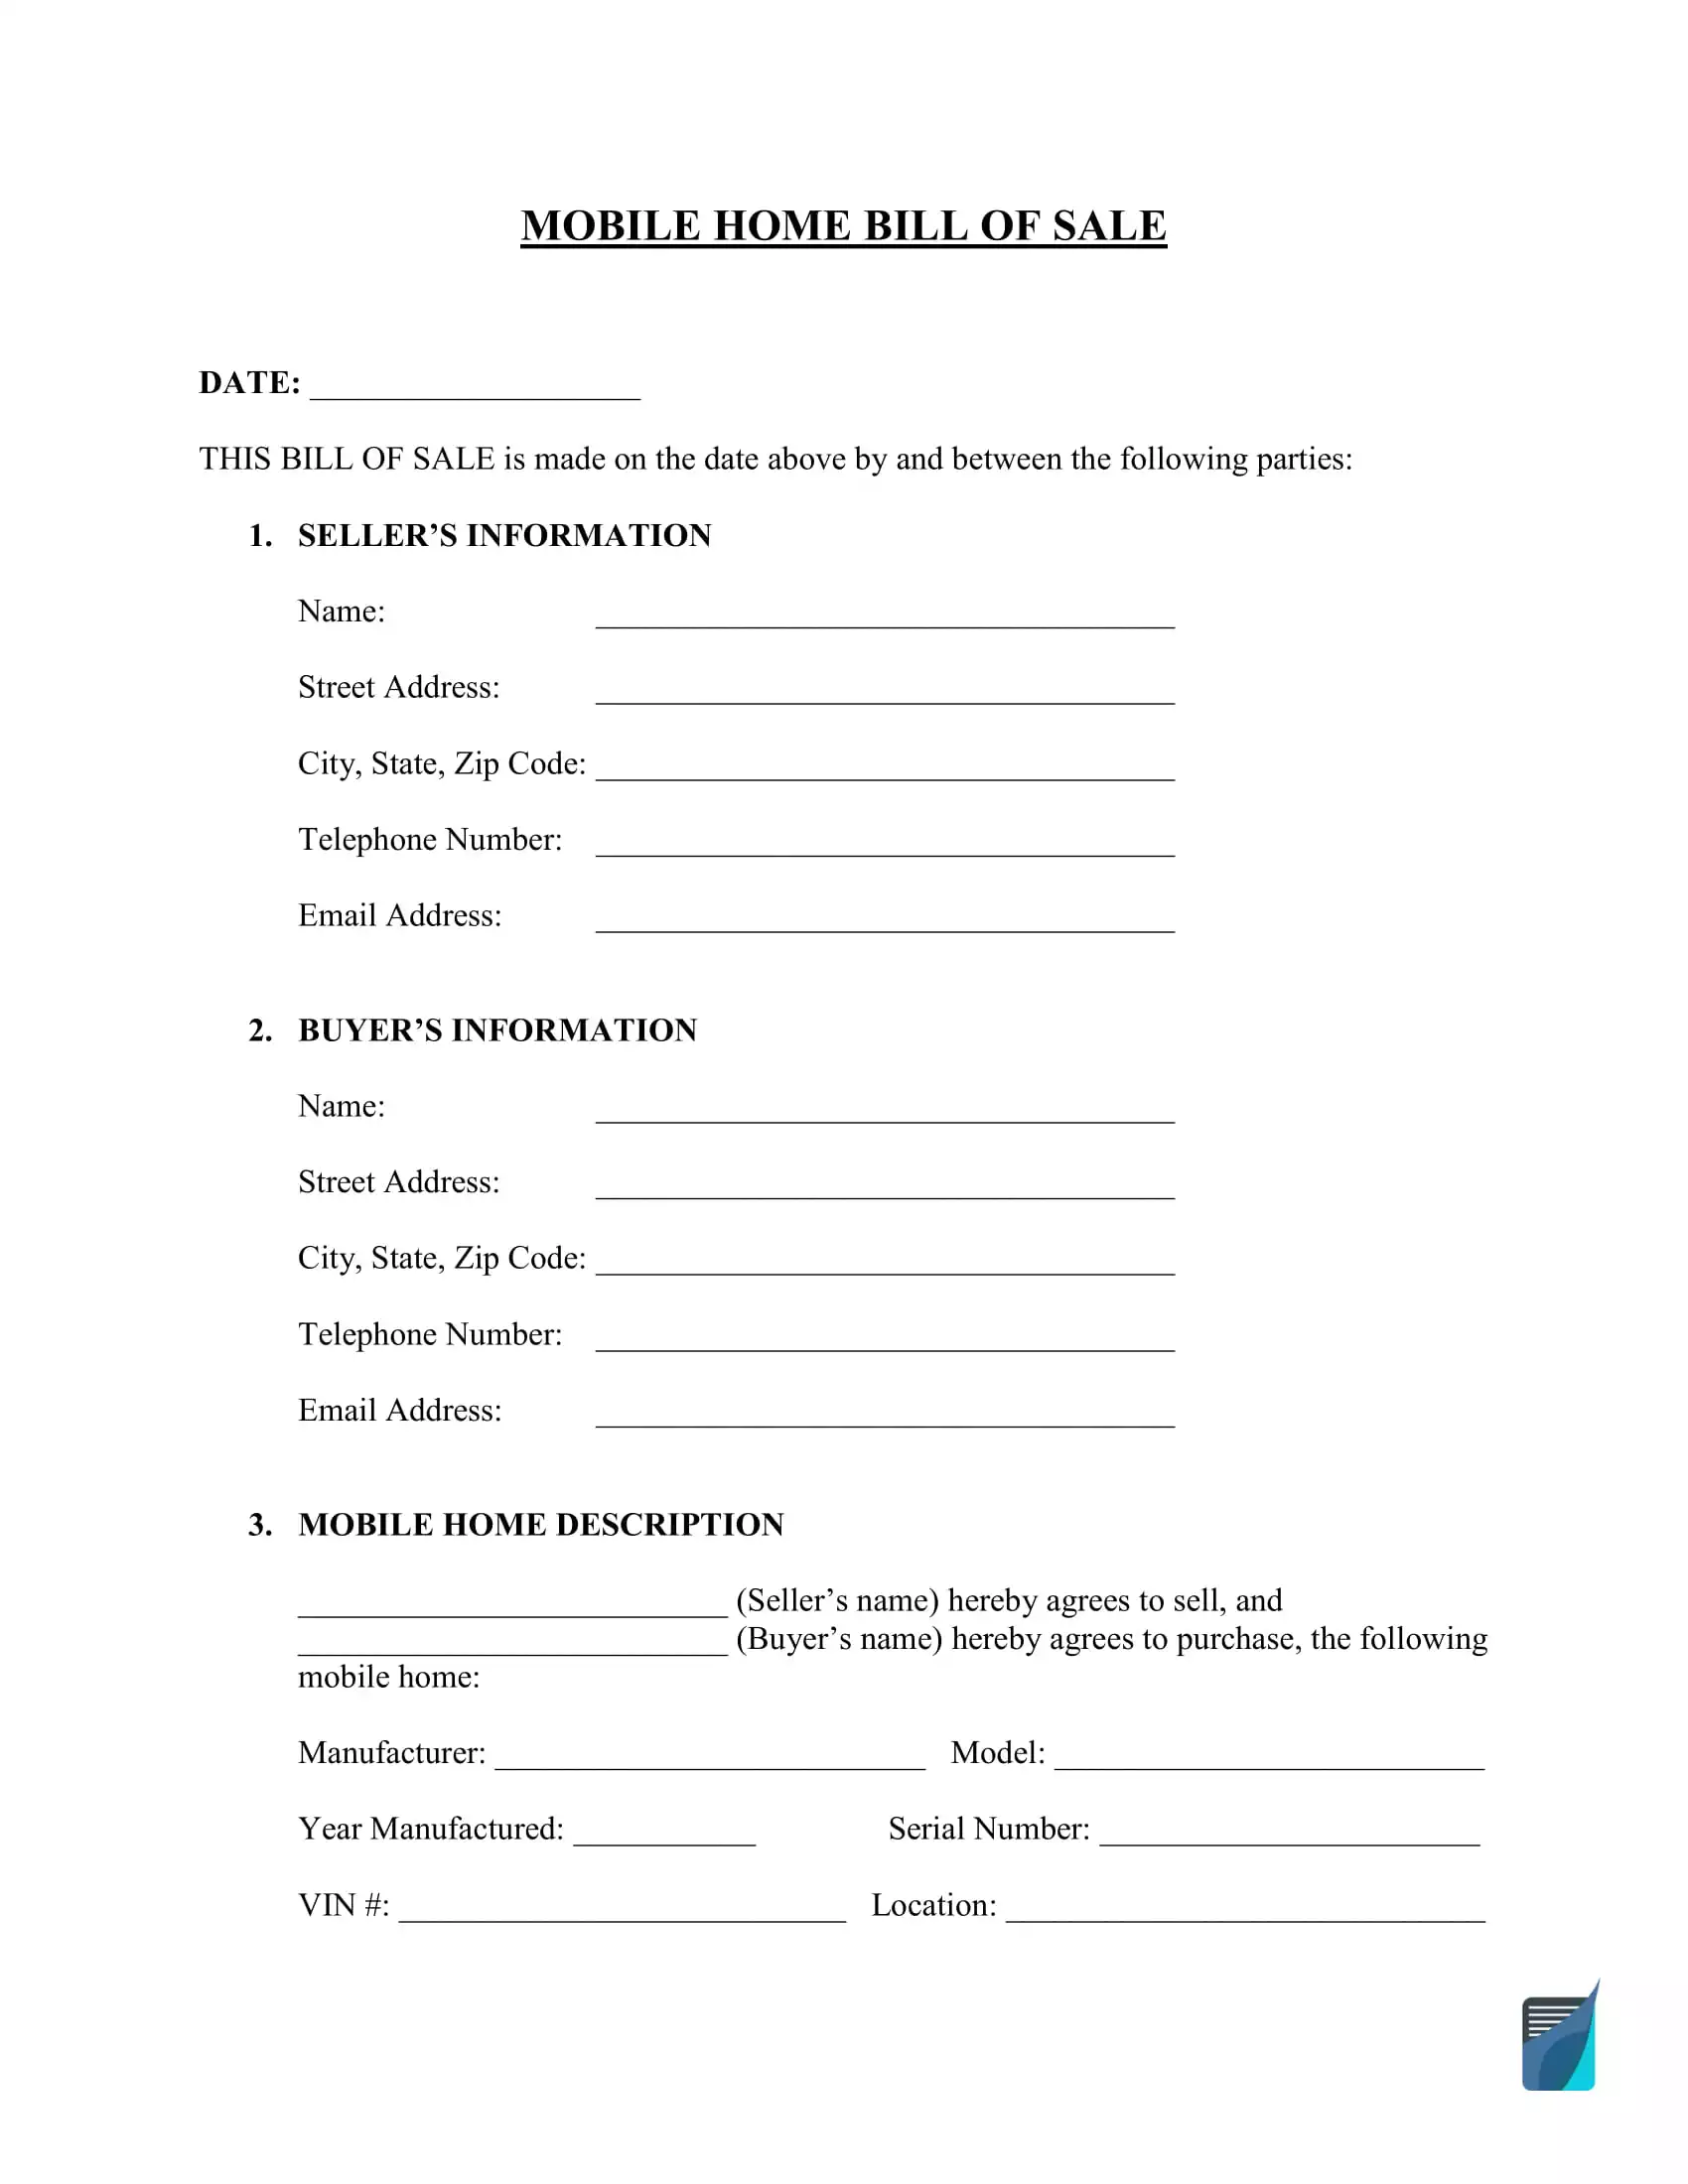 Mobile-Home-bill-of-sale-template